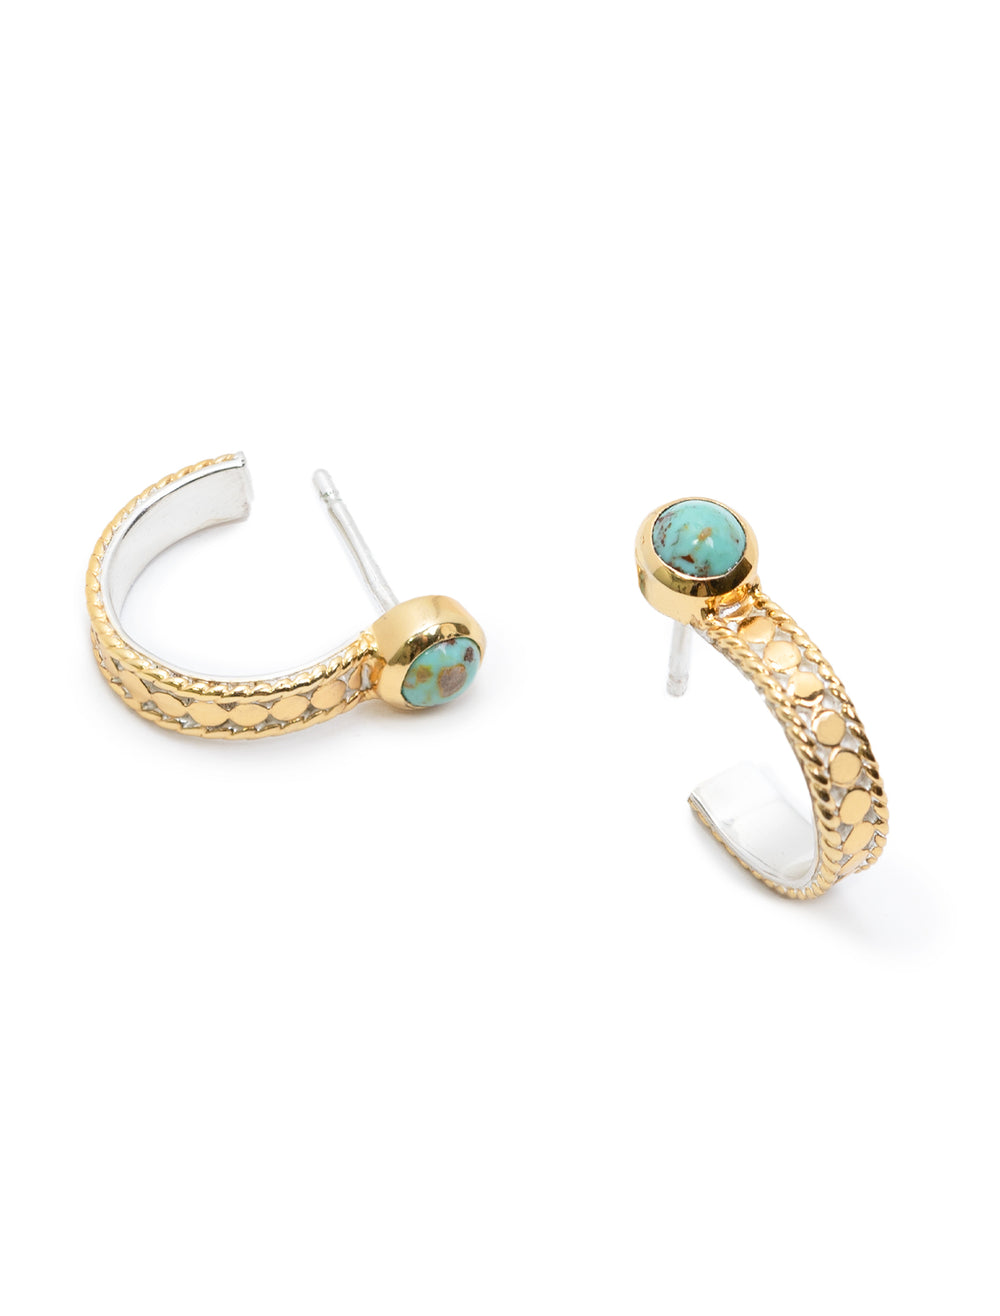 Laydown of Anna Beck's turquoise hoop earrings in gold.